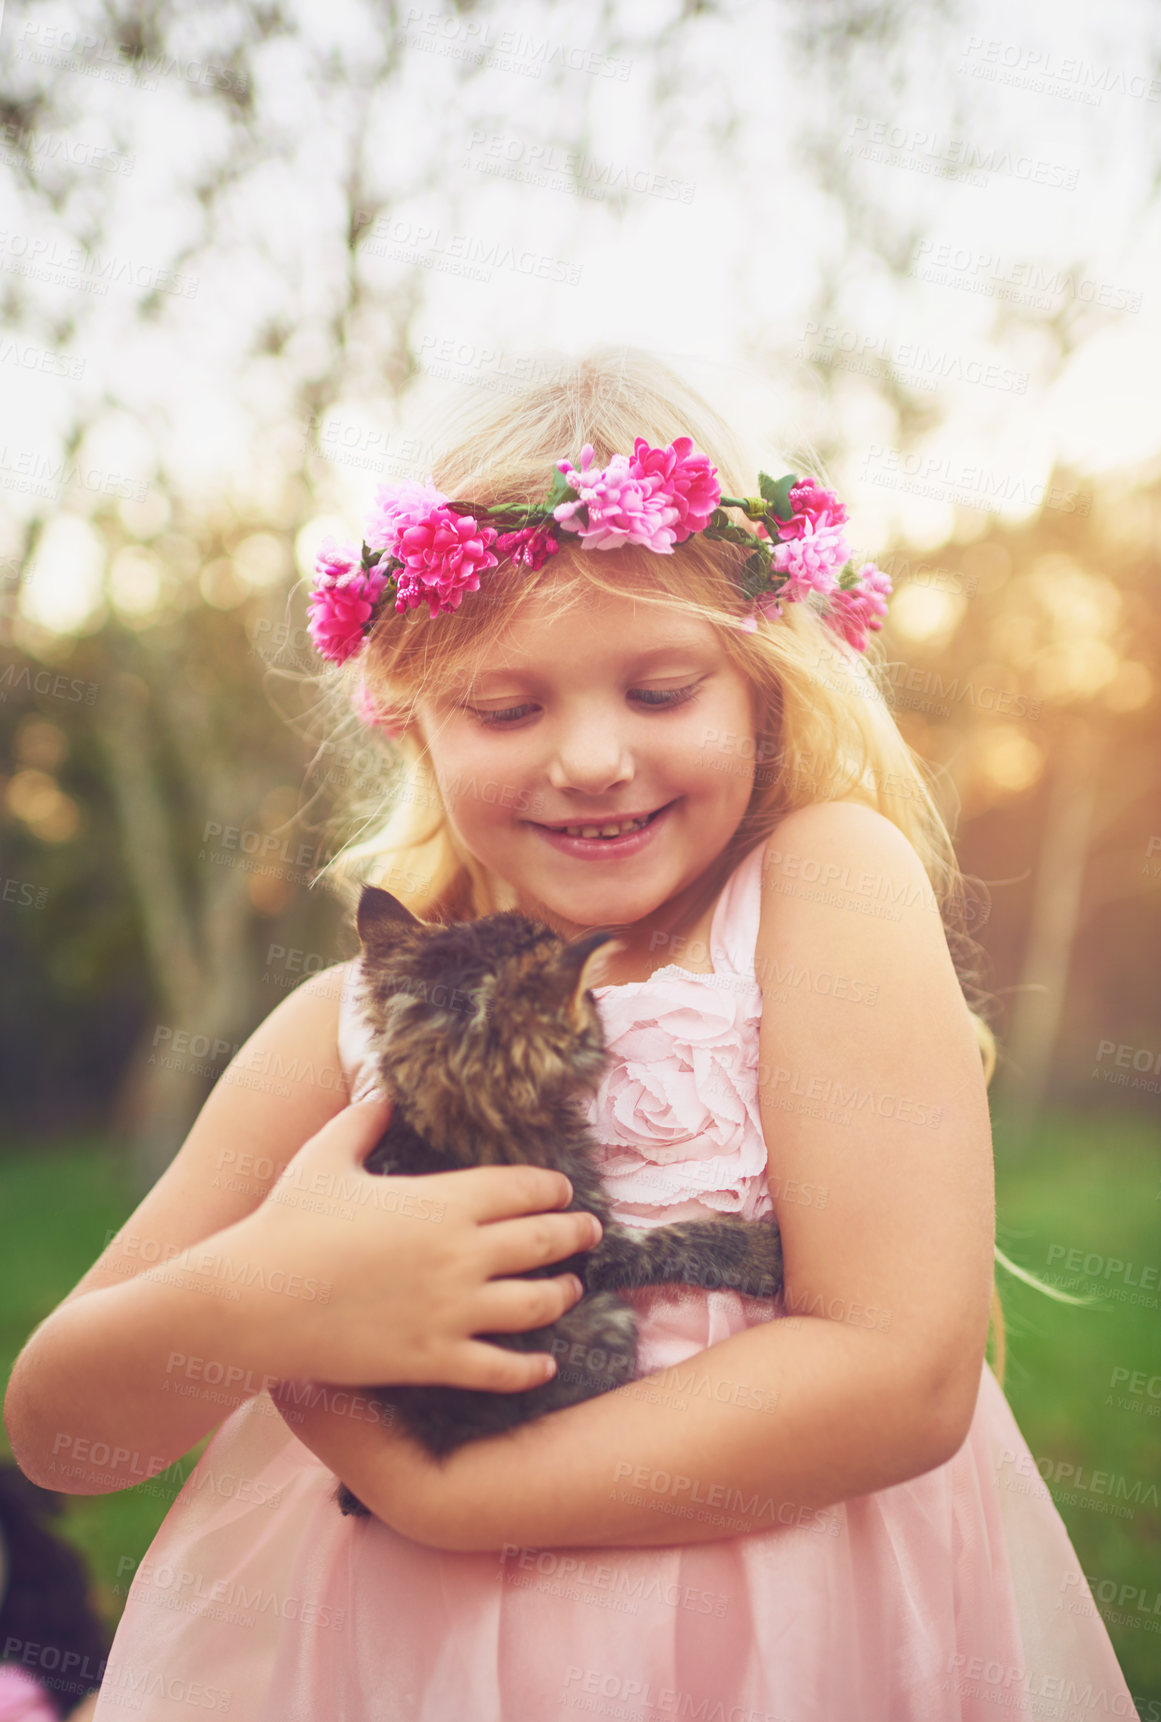 Buy stock photo Shot of a little girl holding a kitten and petting it while standing outside in nature